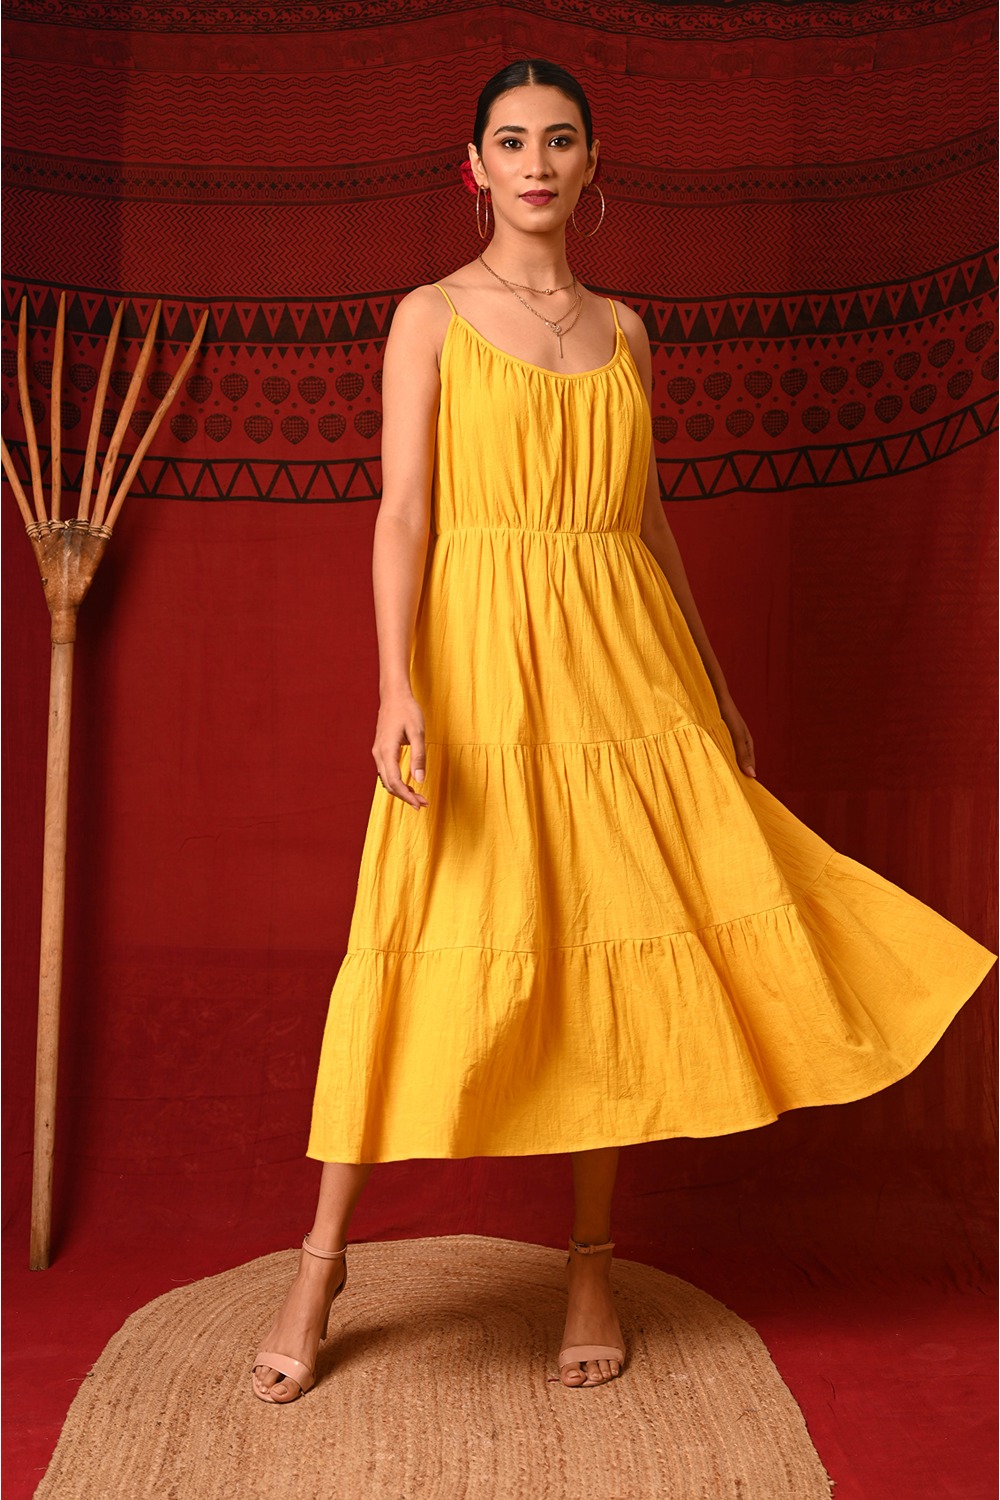  Teired Canary Yellow Cotton Dress 